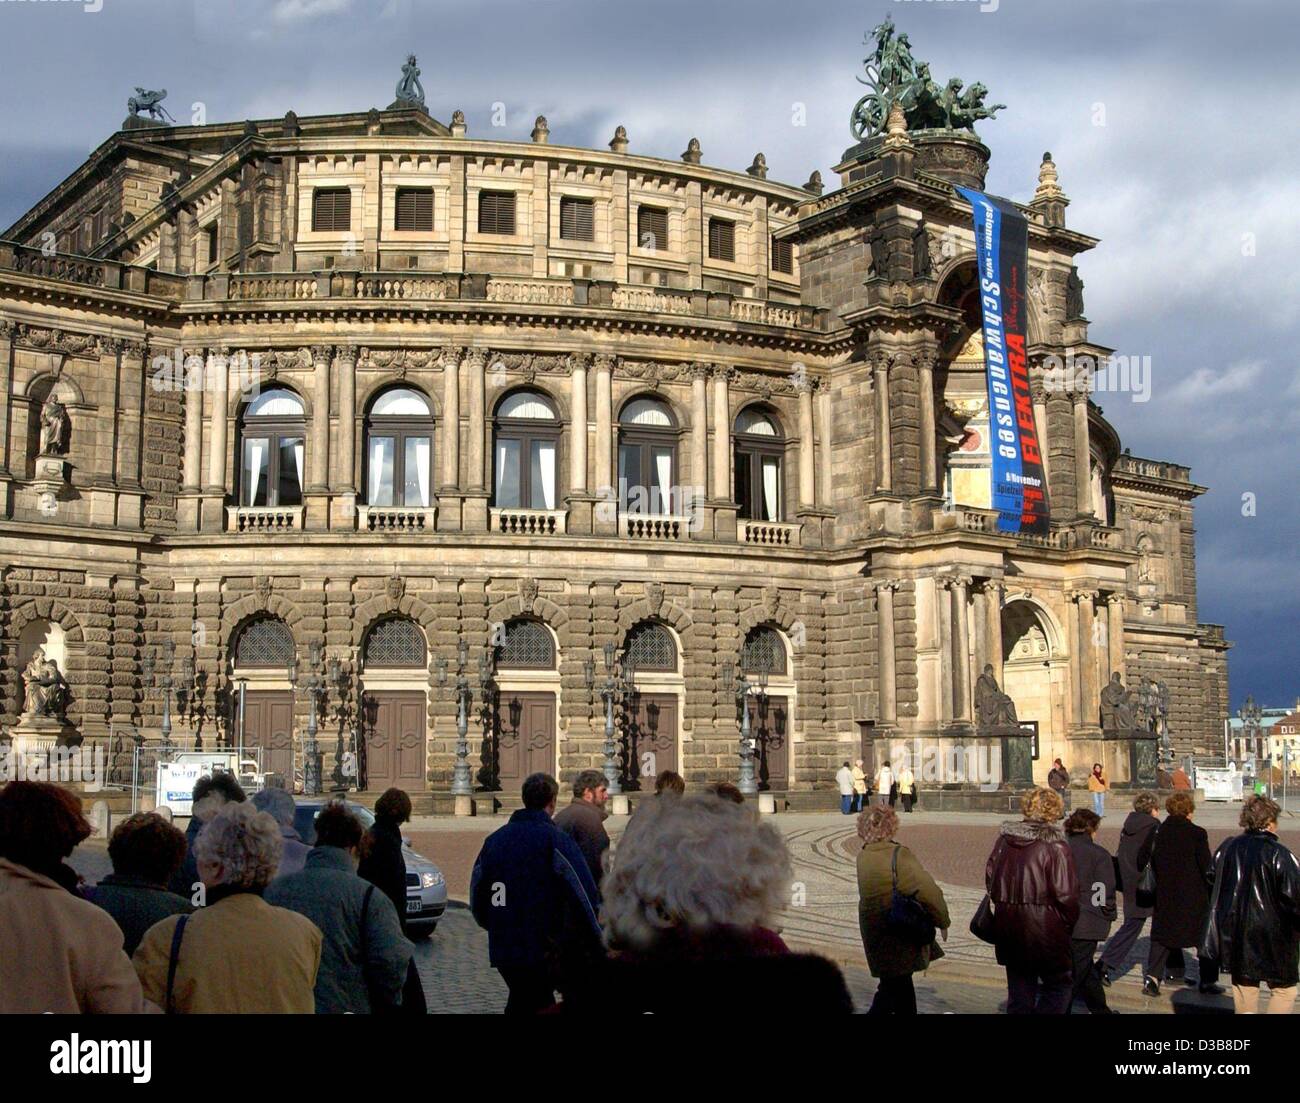 (dpa) - Tourists stand in front of the Semper Opera in Dresden, Germany, 9 November 2002. Three months after the devastating floods in eastern Germany the opera reopened with a ceremony. Damages after the flood amounted to about 27 million Euro. Reconstruction works on the opera continue during the  Stock Photo